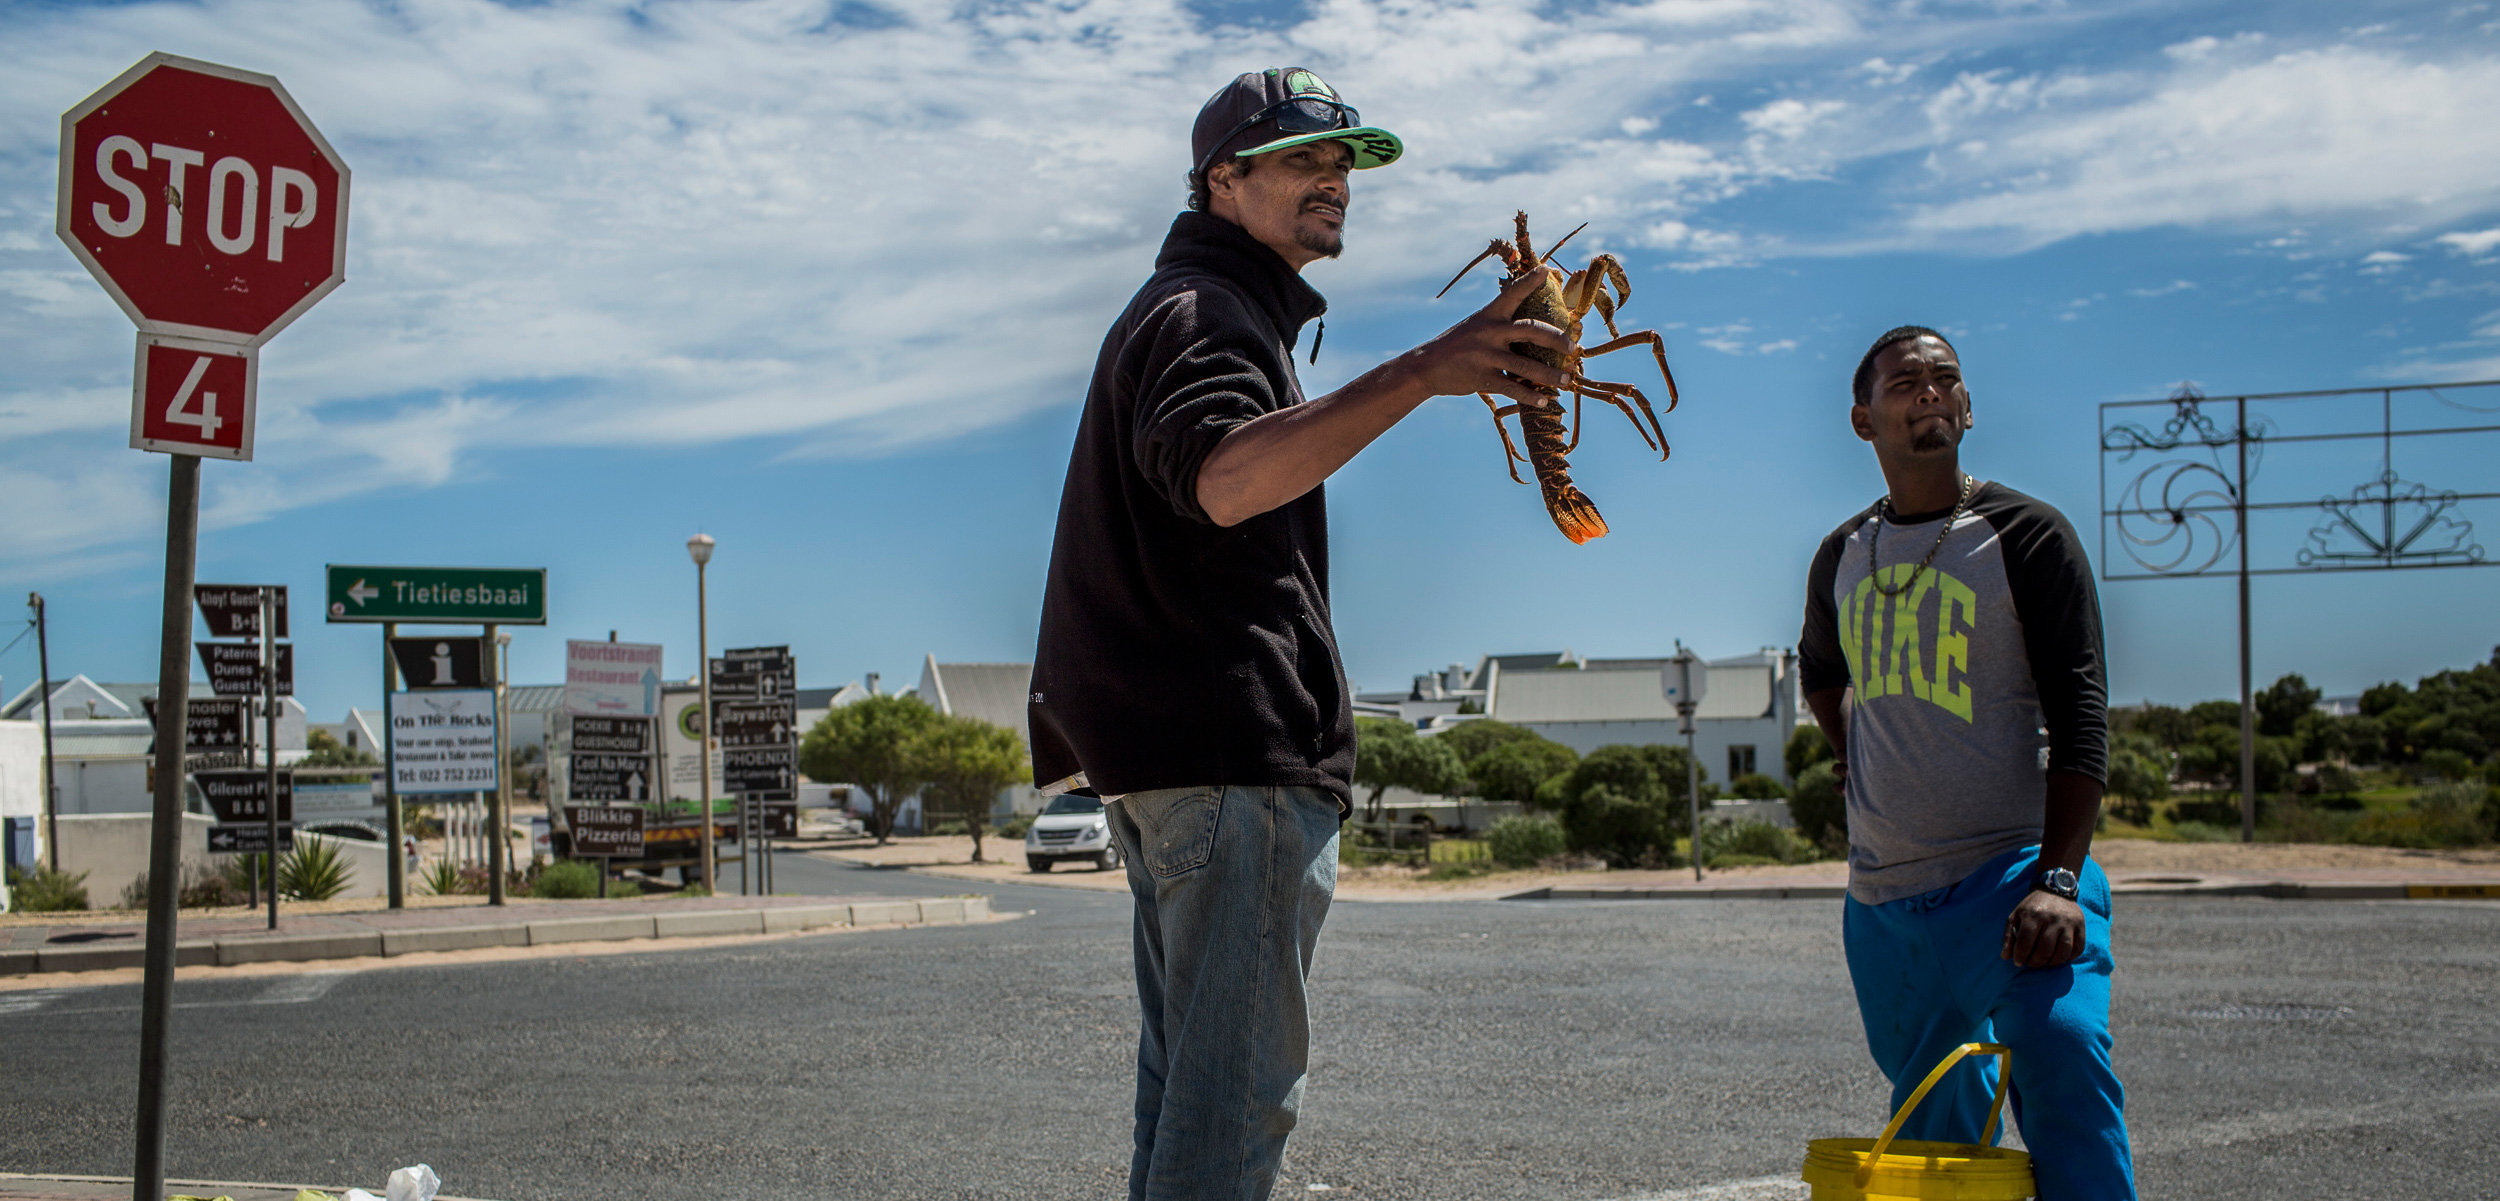 At the entrance to Paternoster, South Africa, men openly sell illegally harvested crayfish. Photo by Charlie Shoemaker